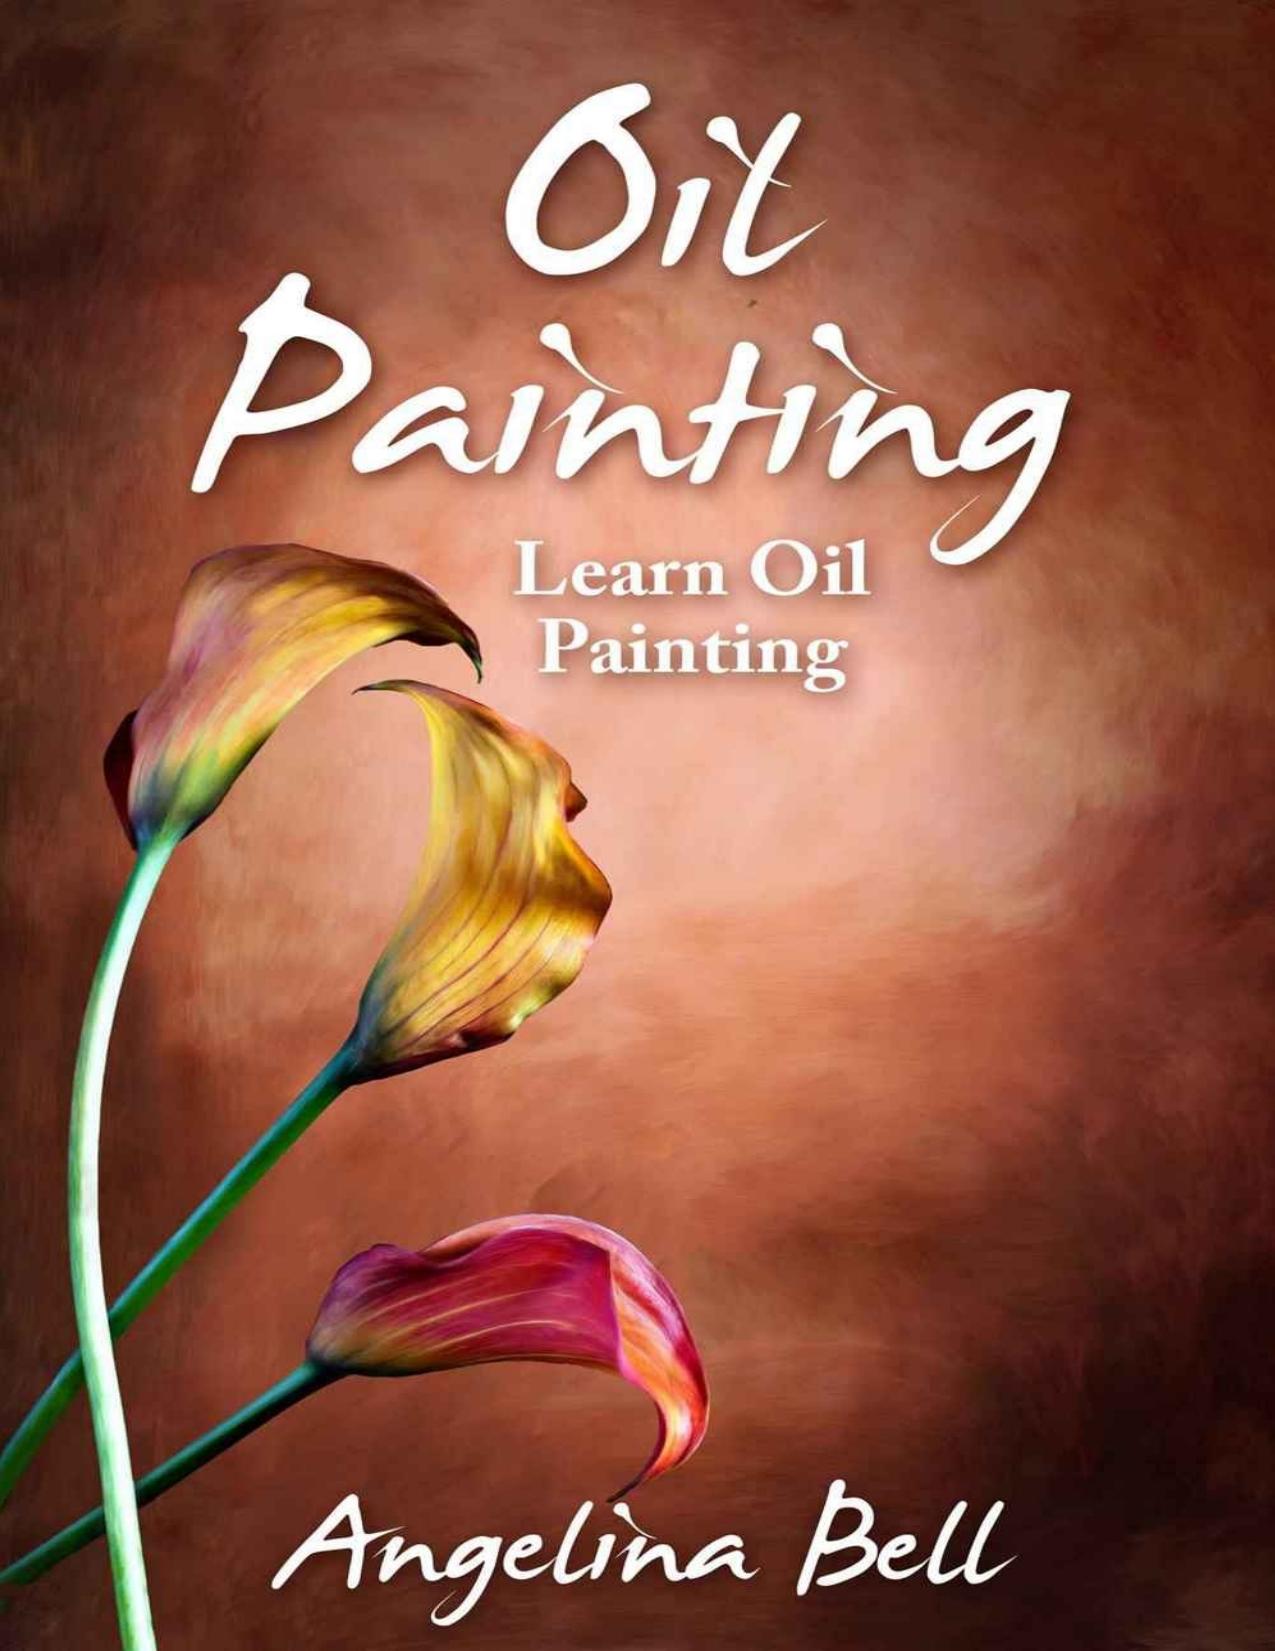 Oil Painting: Learn Oil Painting FAST! Learn the Basics of Oil Painting In No Time - PDFDrive.com